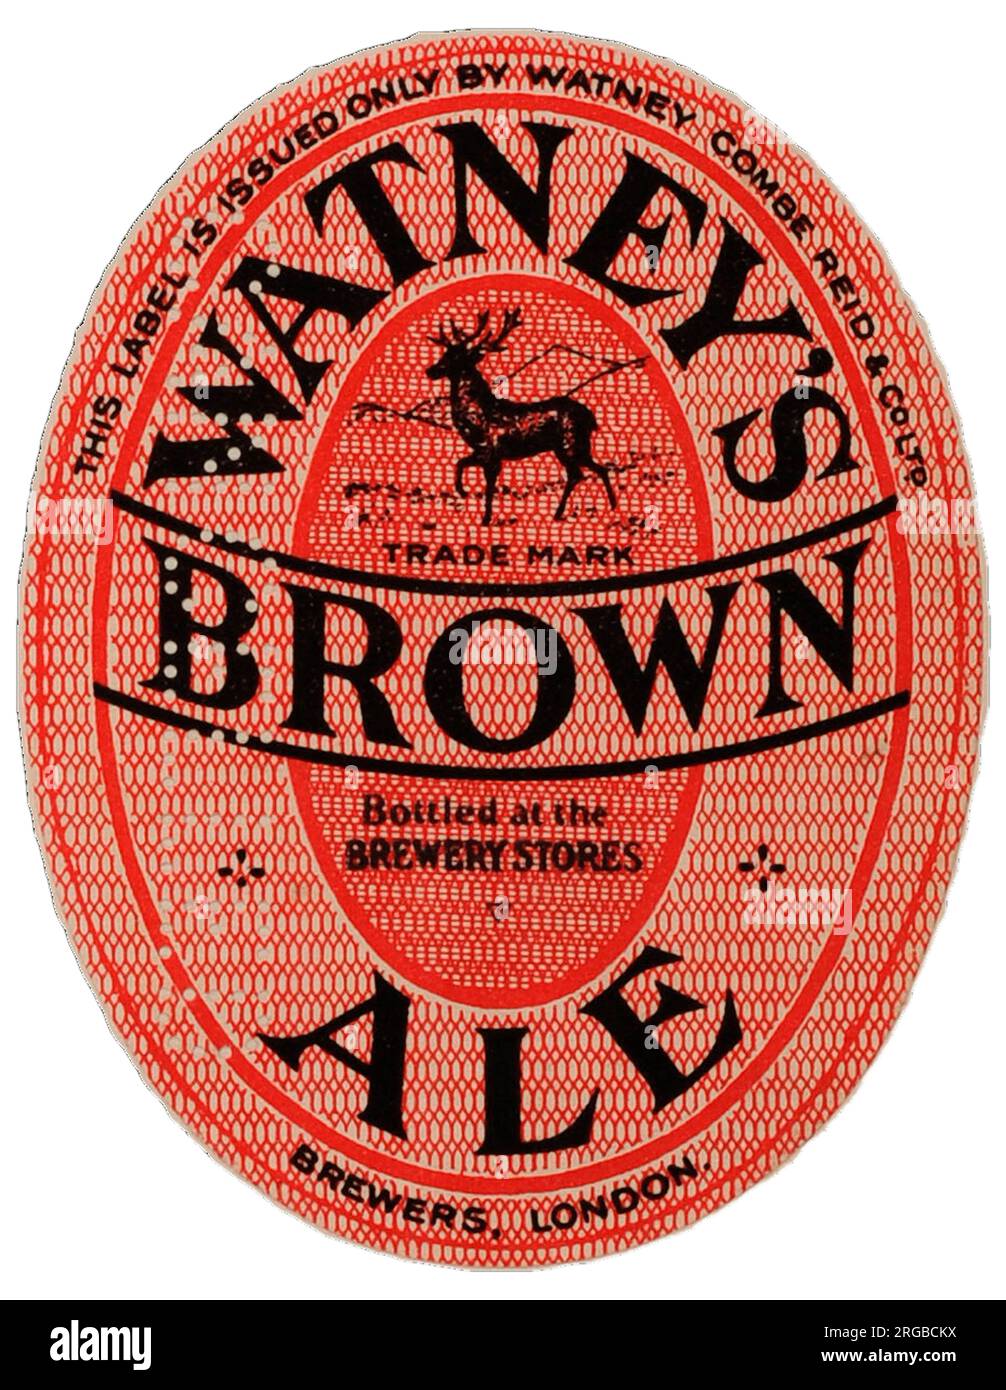 Watney's Brown Ale Stock Photo